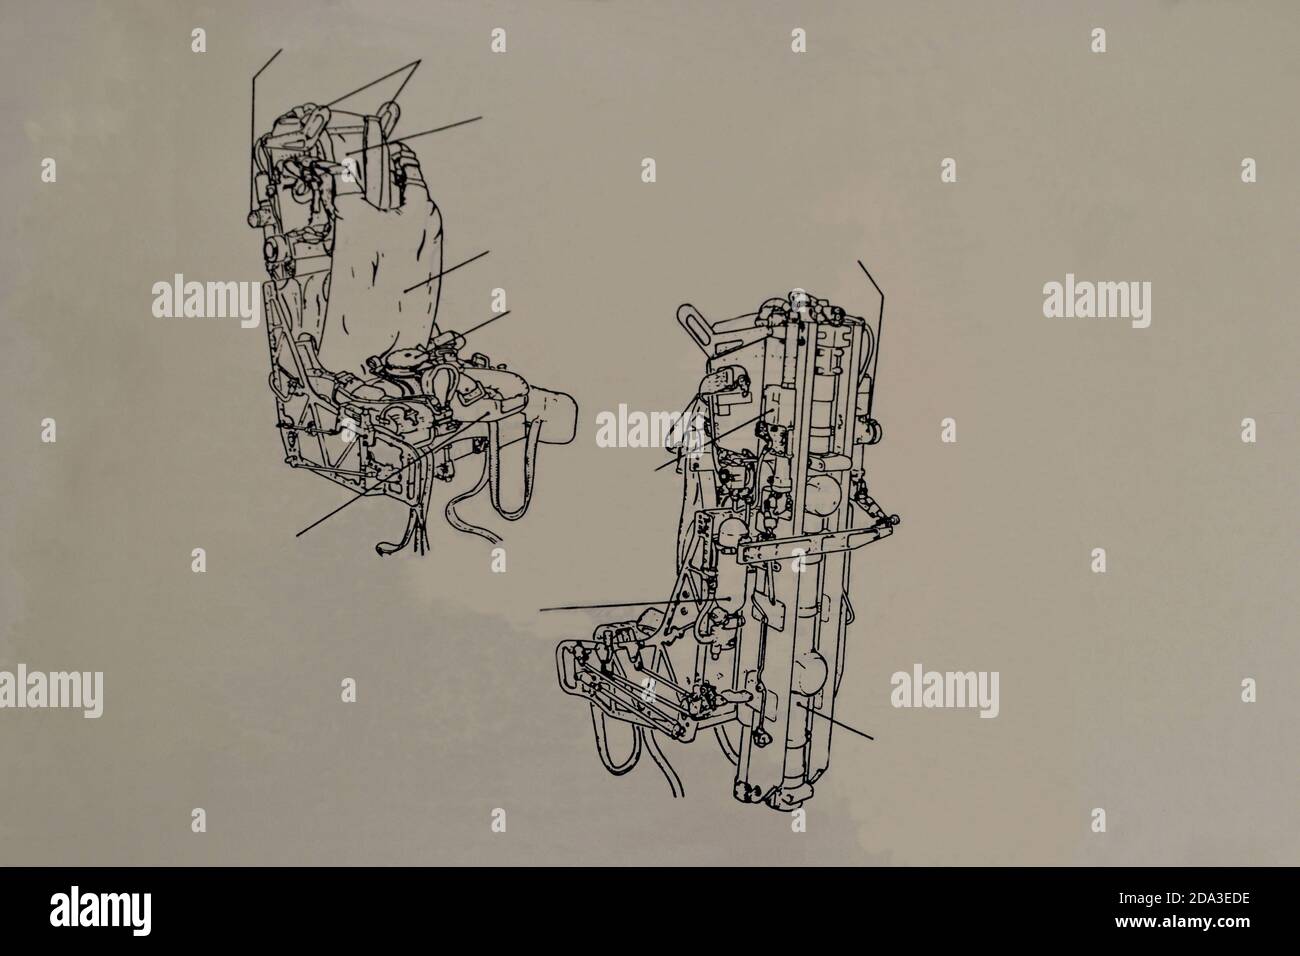 Ejection seat of military aircraft in drawing on sheet of paper, hand drawn, in side, rear and front view Stock Photo